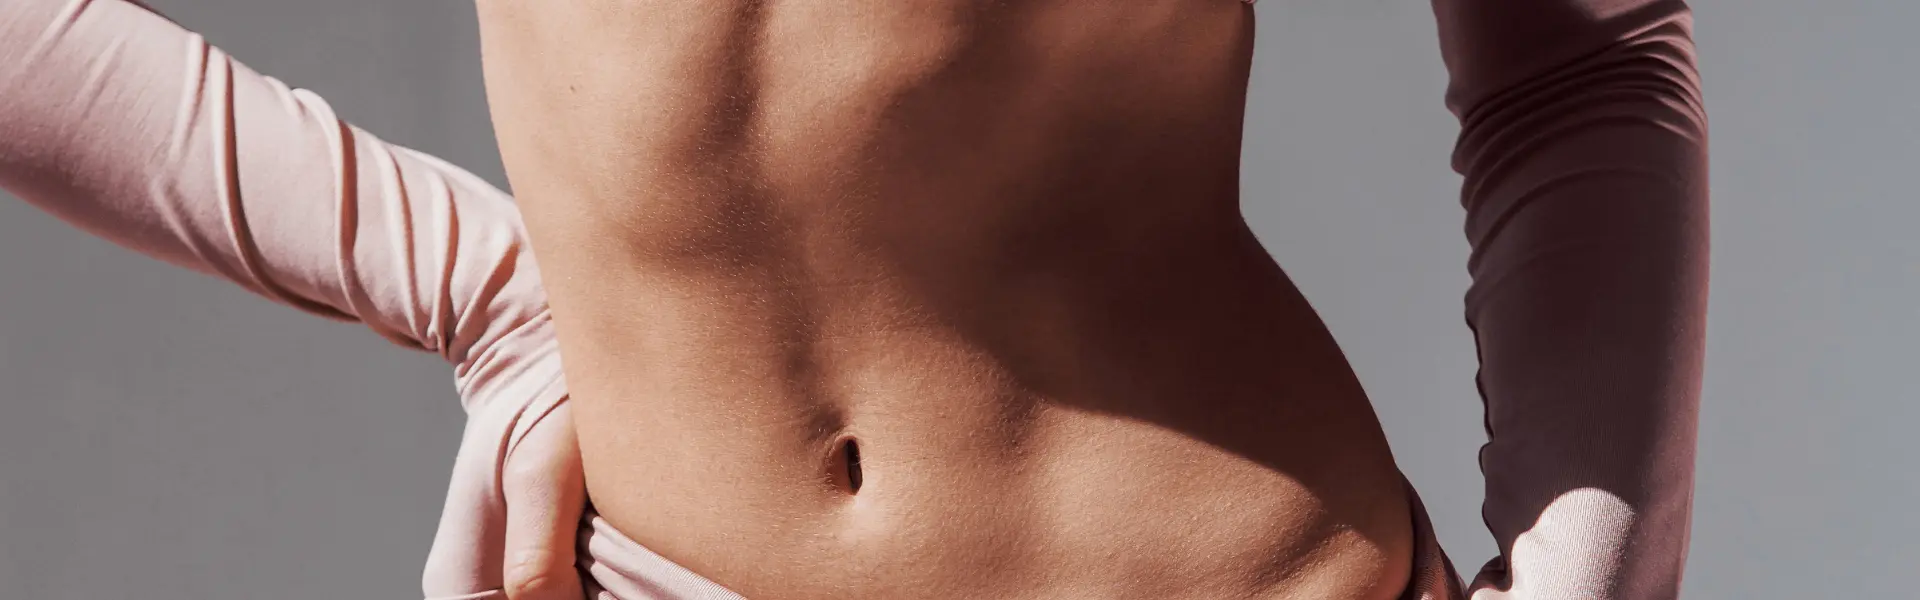 Body Contouring Guide: Natural Curves for Long-Lasting Results